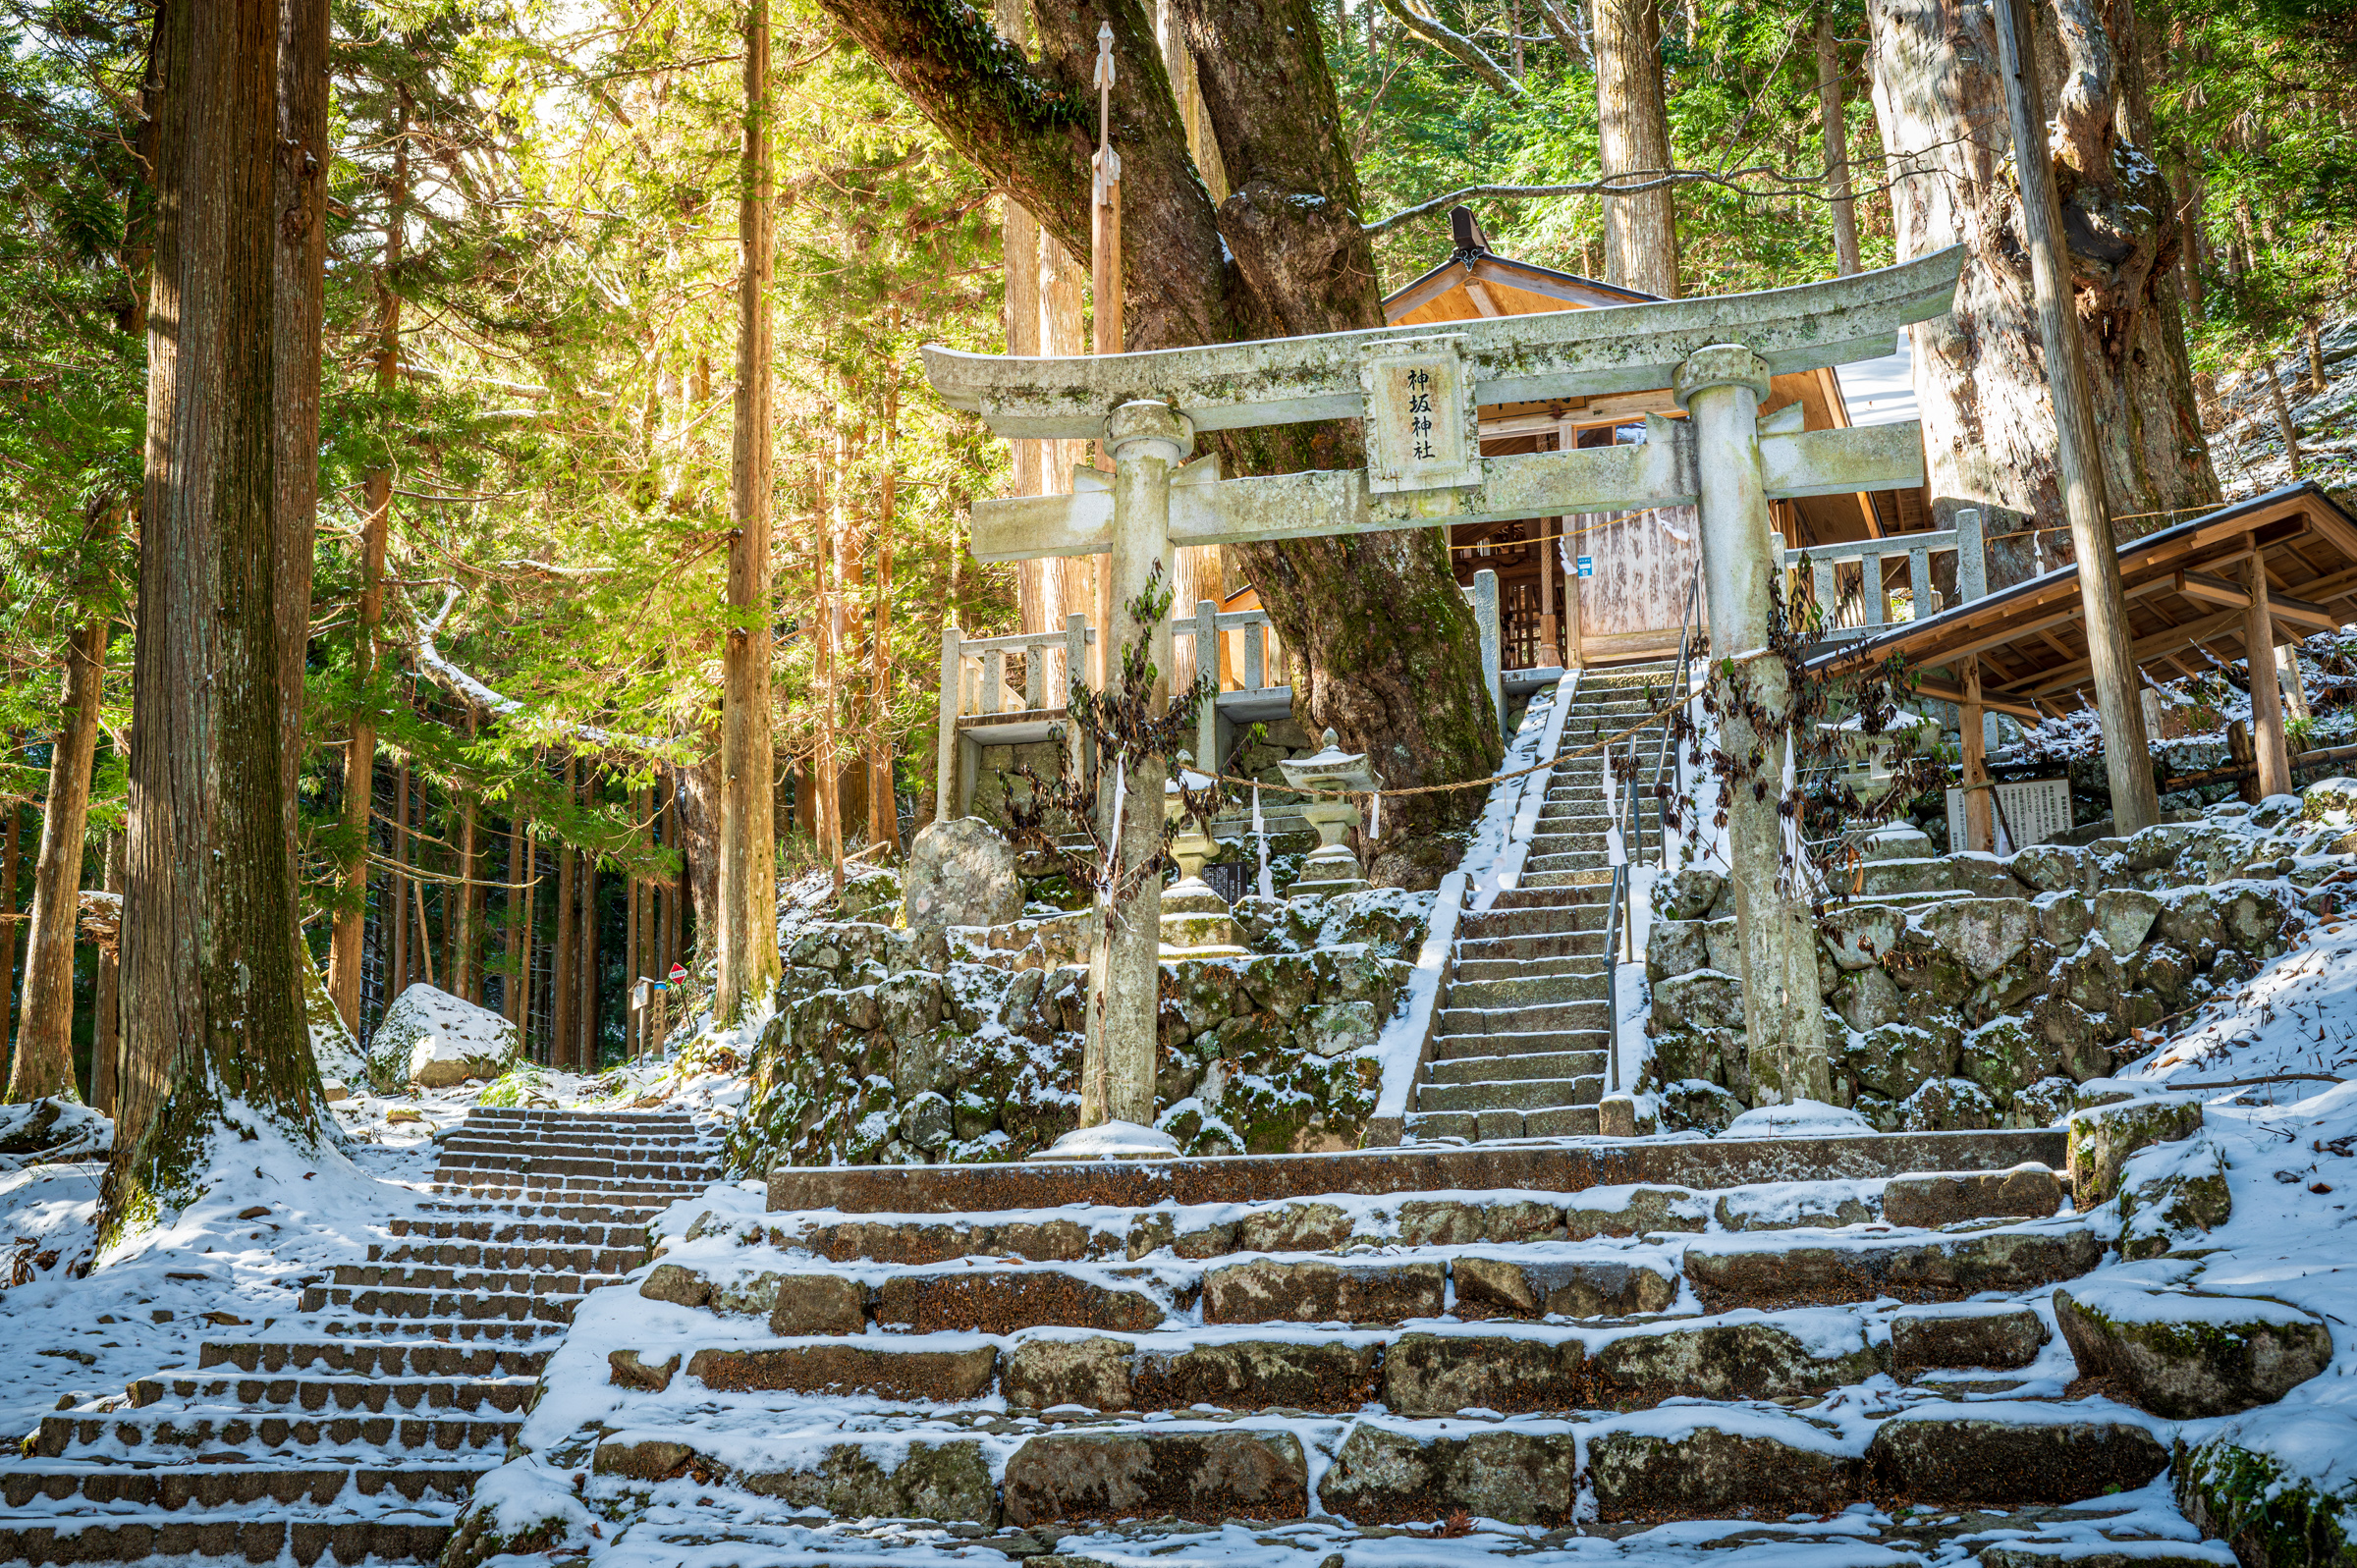 The Ancient Trails of Southern Nagano